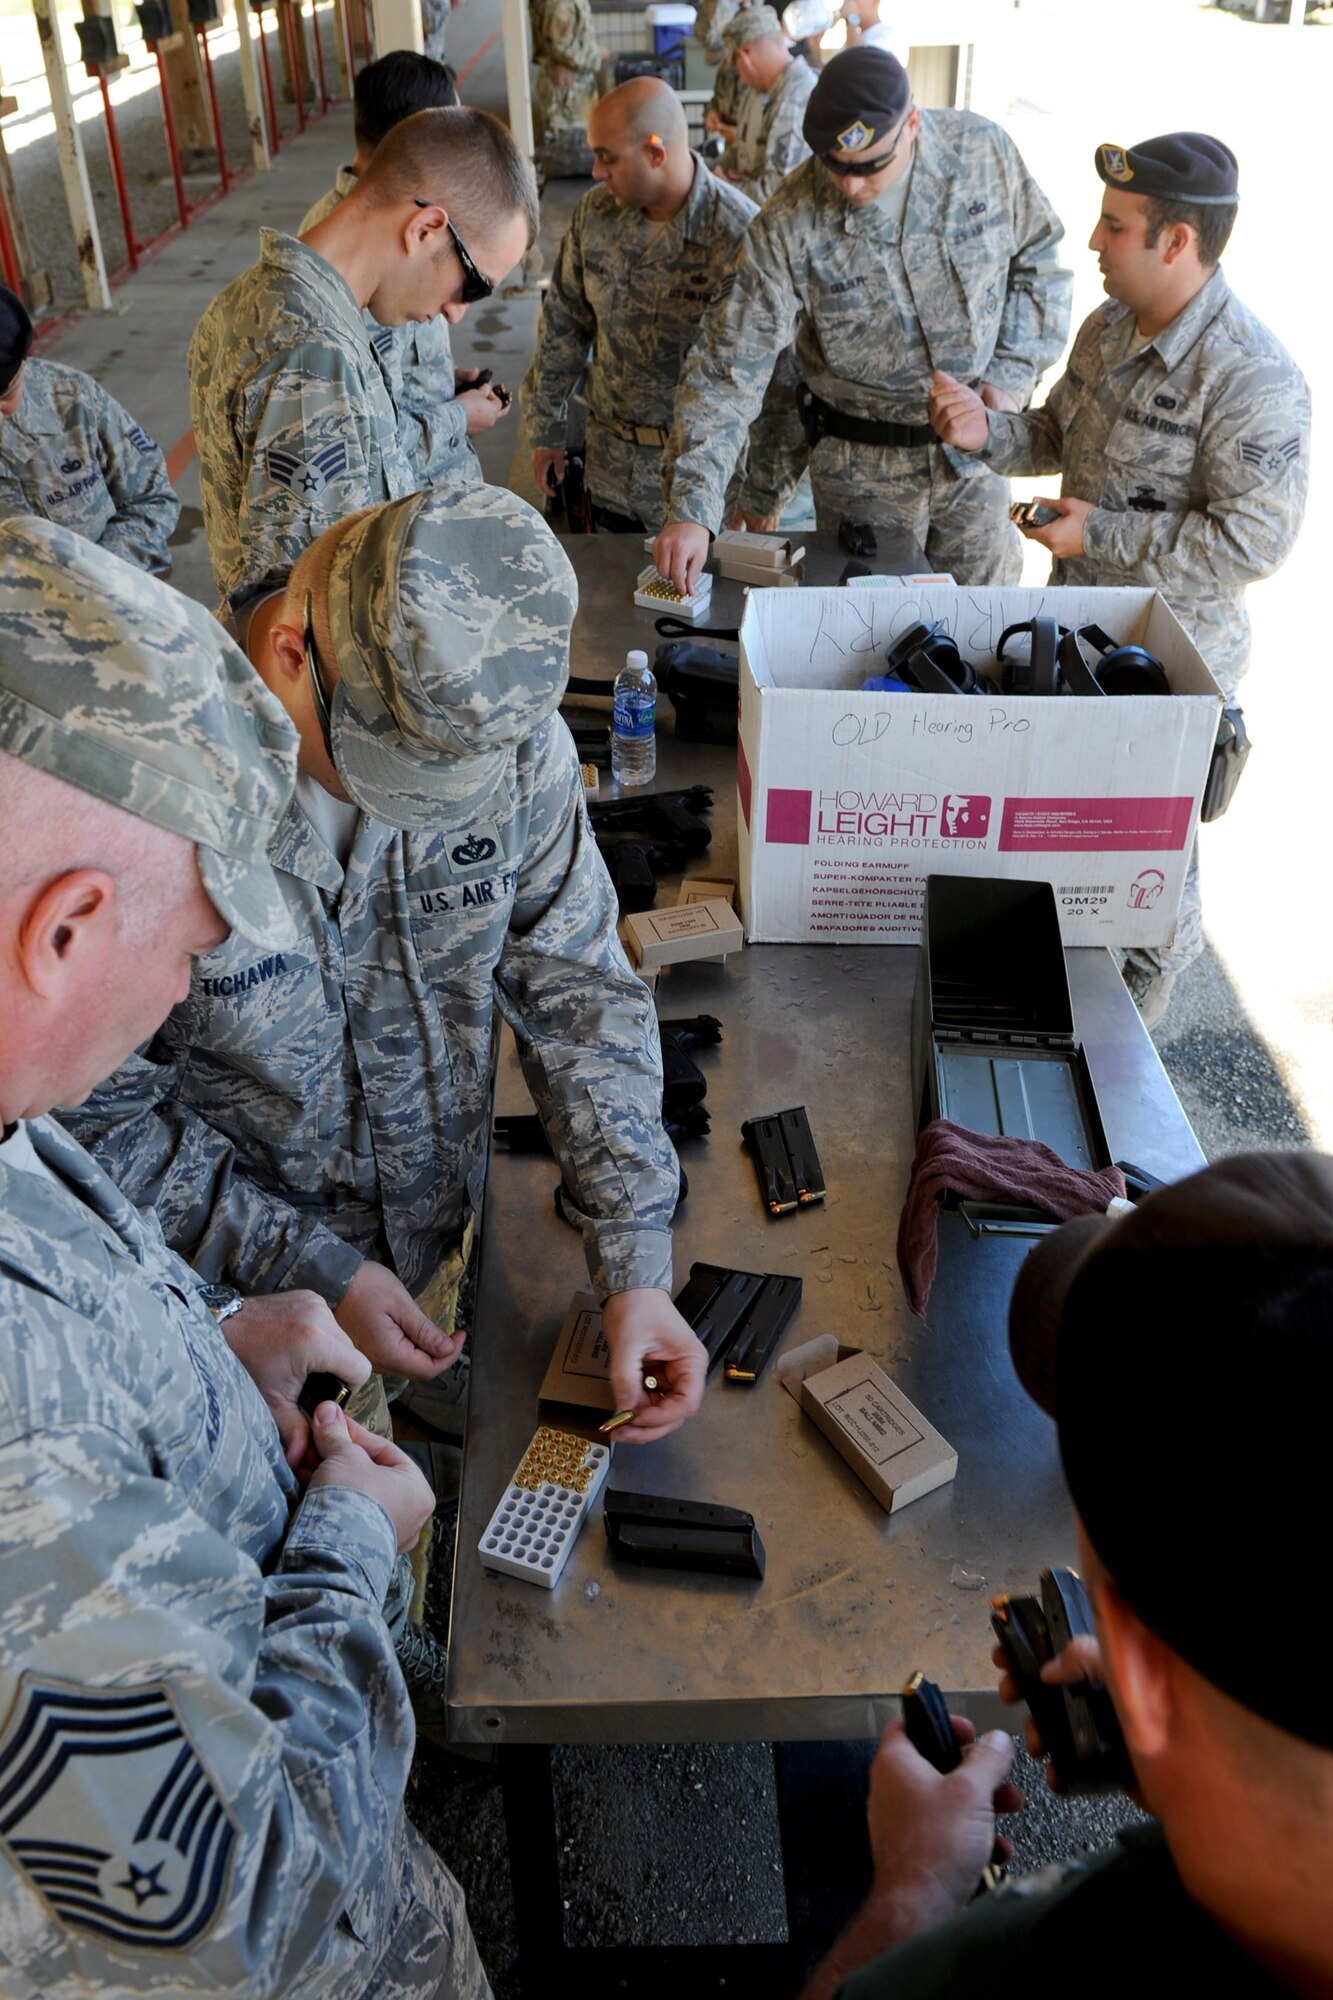 VANDENBERG AIR FORCE BASE, Calif.-- Participants load magazines before a pistol competition at the combat arms training range here Monday, May 14, 2012. The competition was held in conjunction with National Police Week, an annual celebration that recognizes the service and sacrifice of U.S. law enforcement personnel. (U.S. Air Force photo/Staff Sgt. Levi Riendeau)